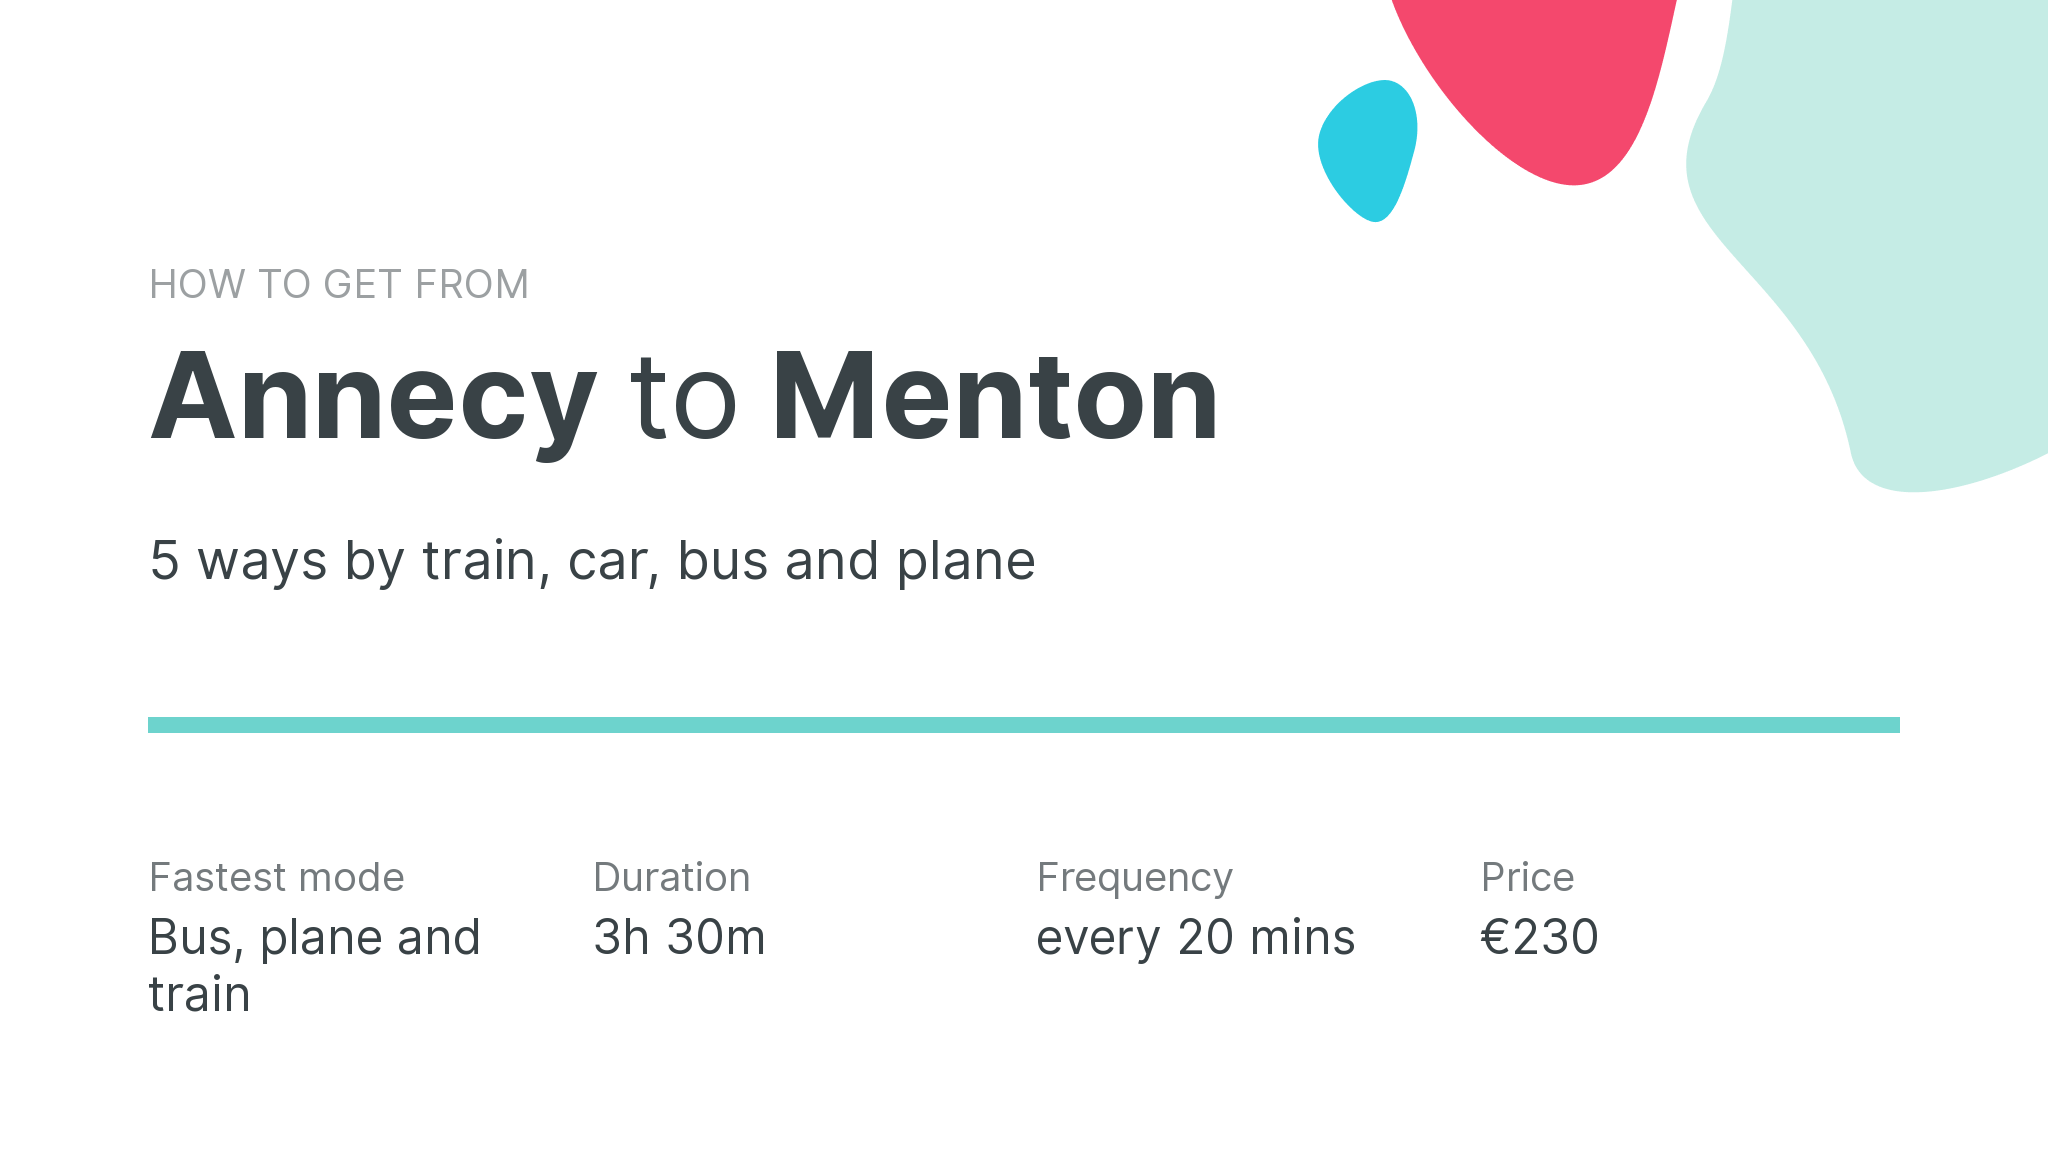 How do I get from Annecy to Menton